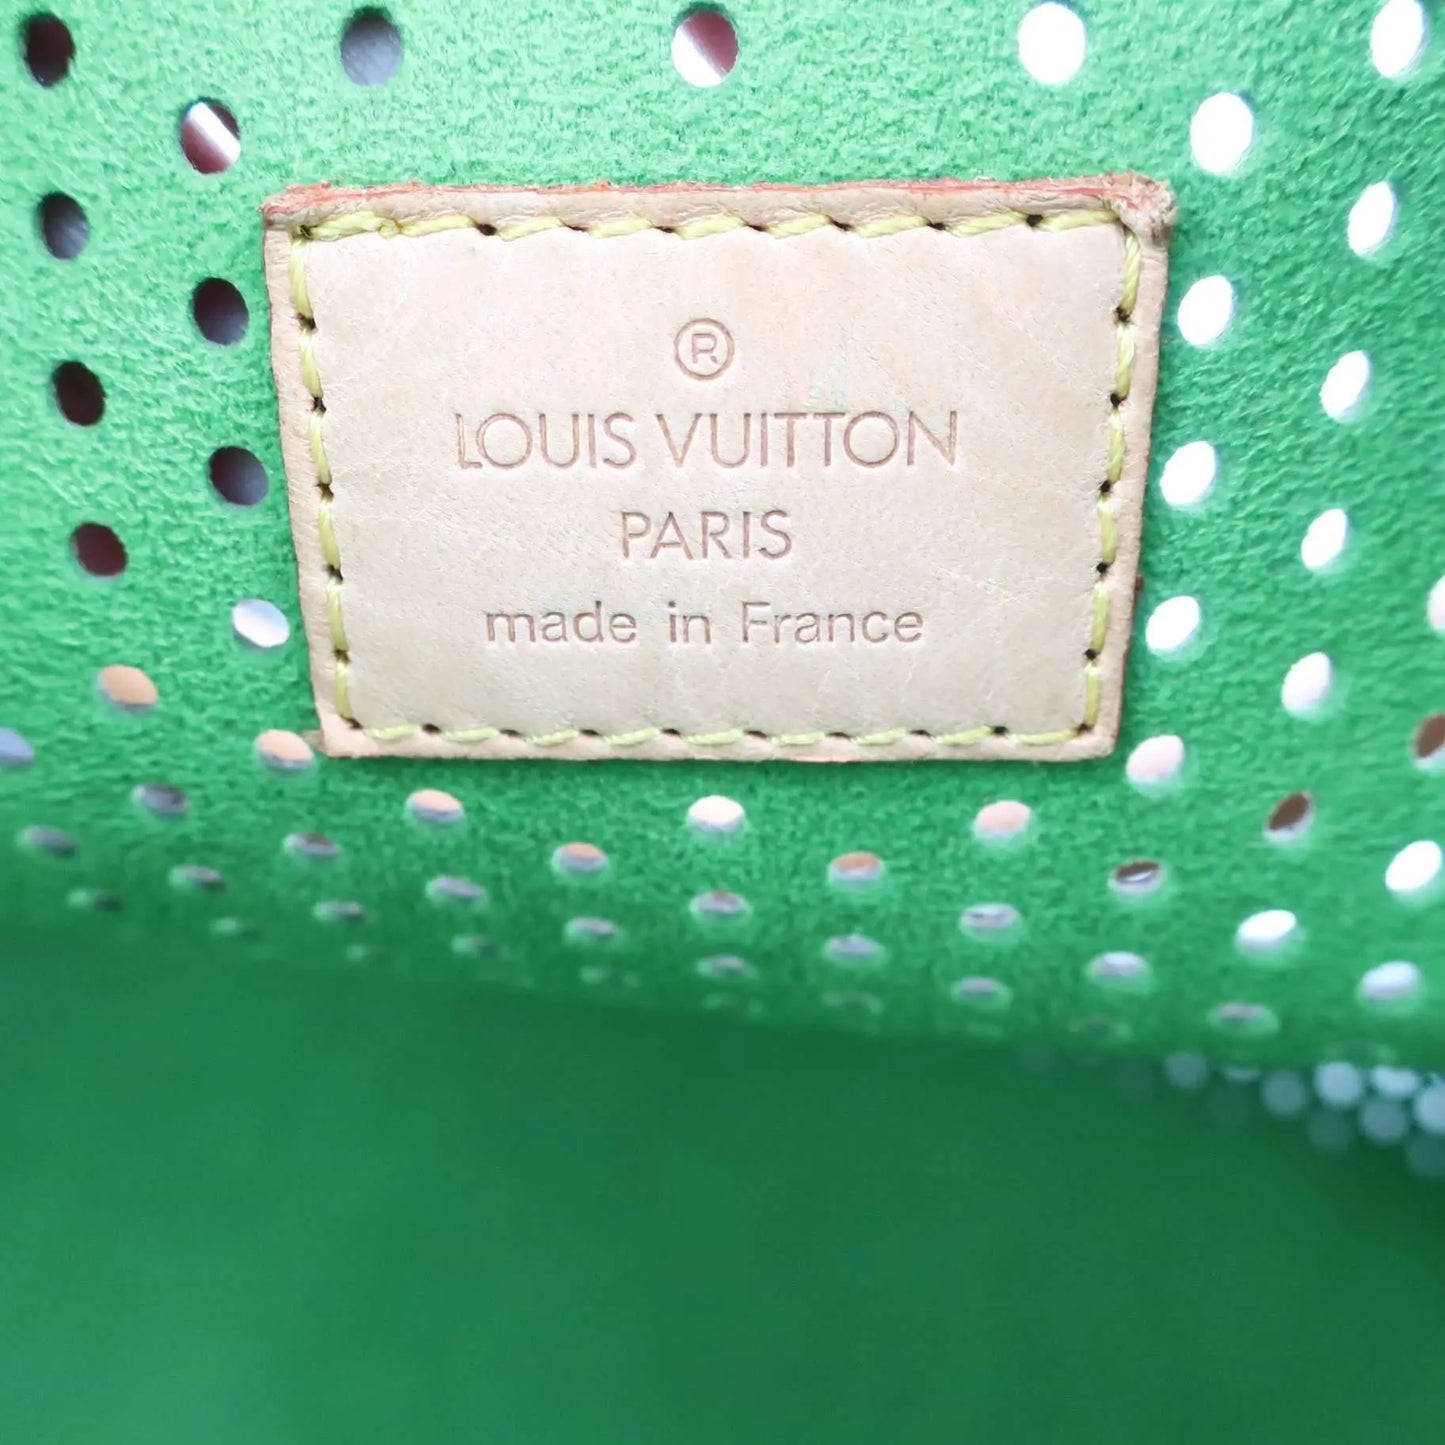 Louis Vuitton Green Perforated Limited Edition Speedy 30 Louis